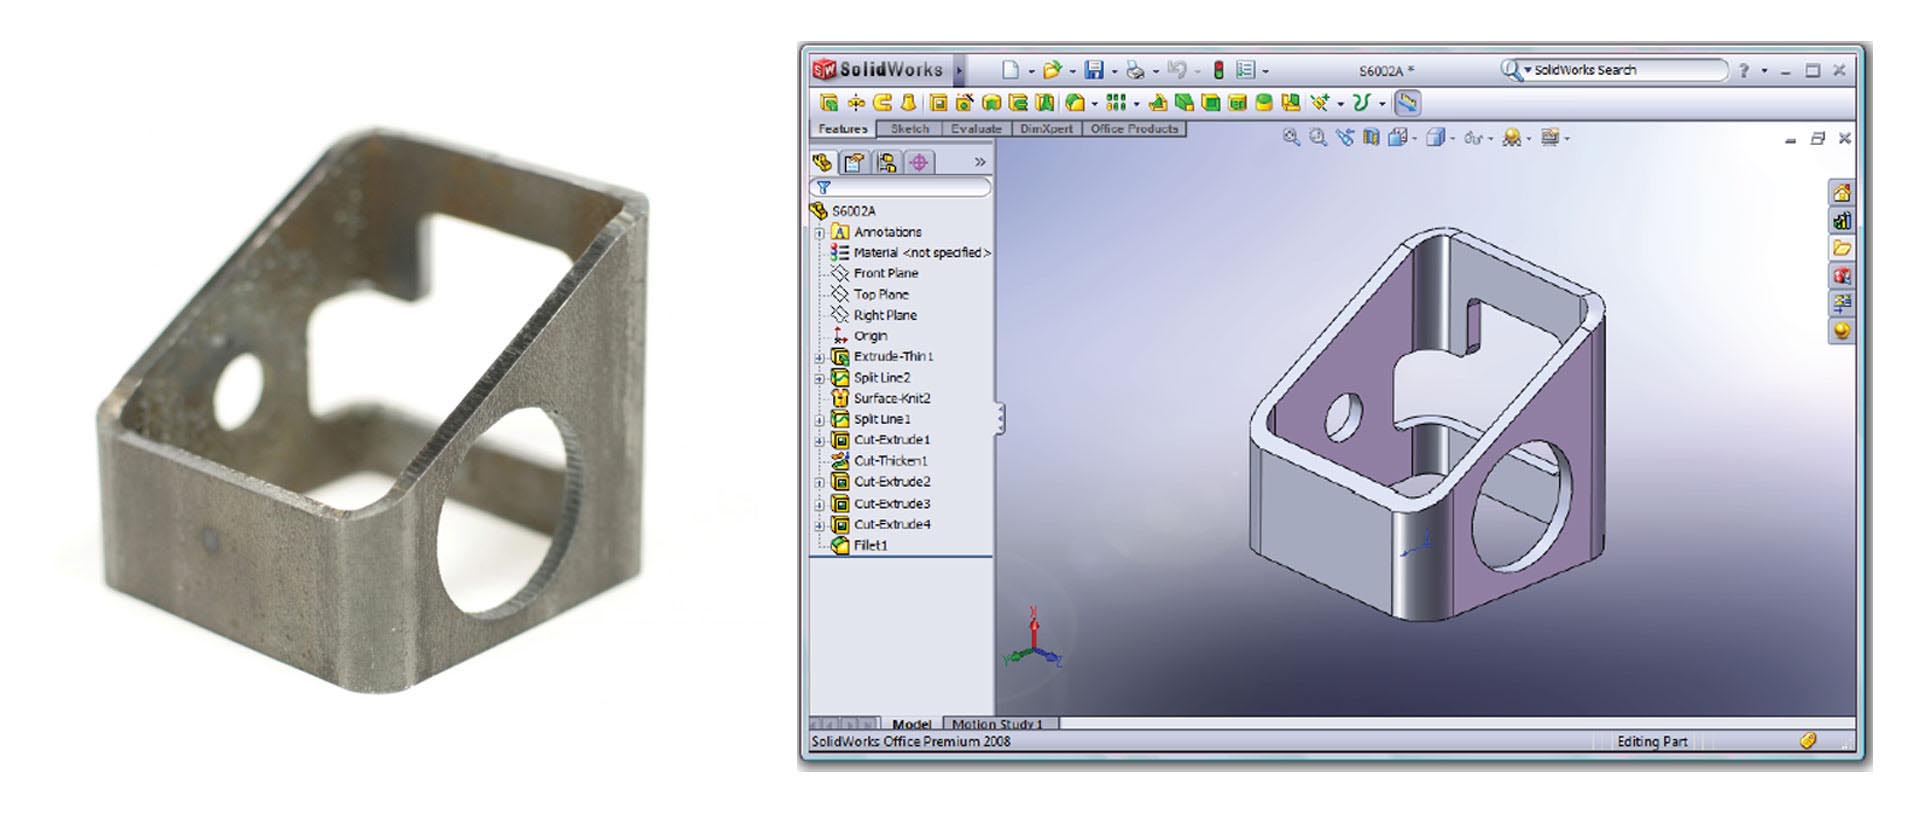 SigmaNEST integrates and automates part creation with 2D and 3D CAD systems.